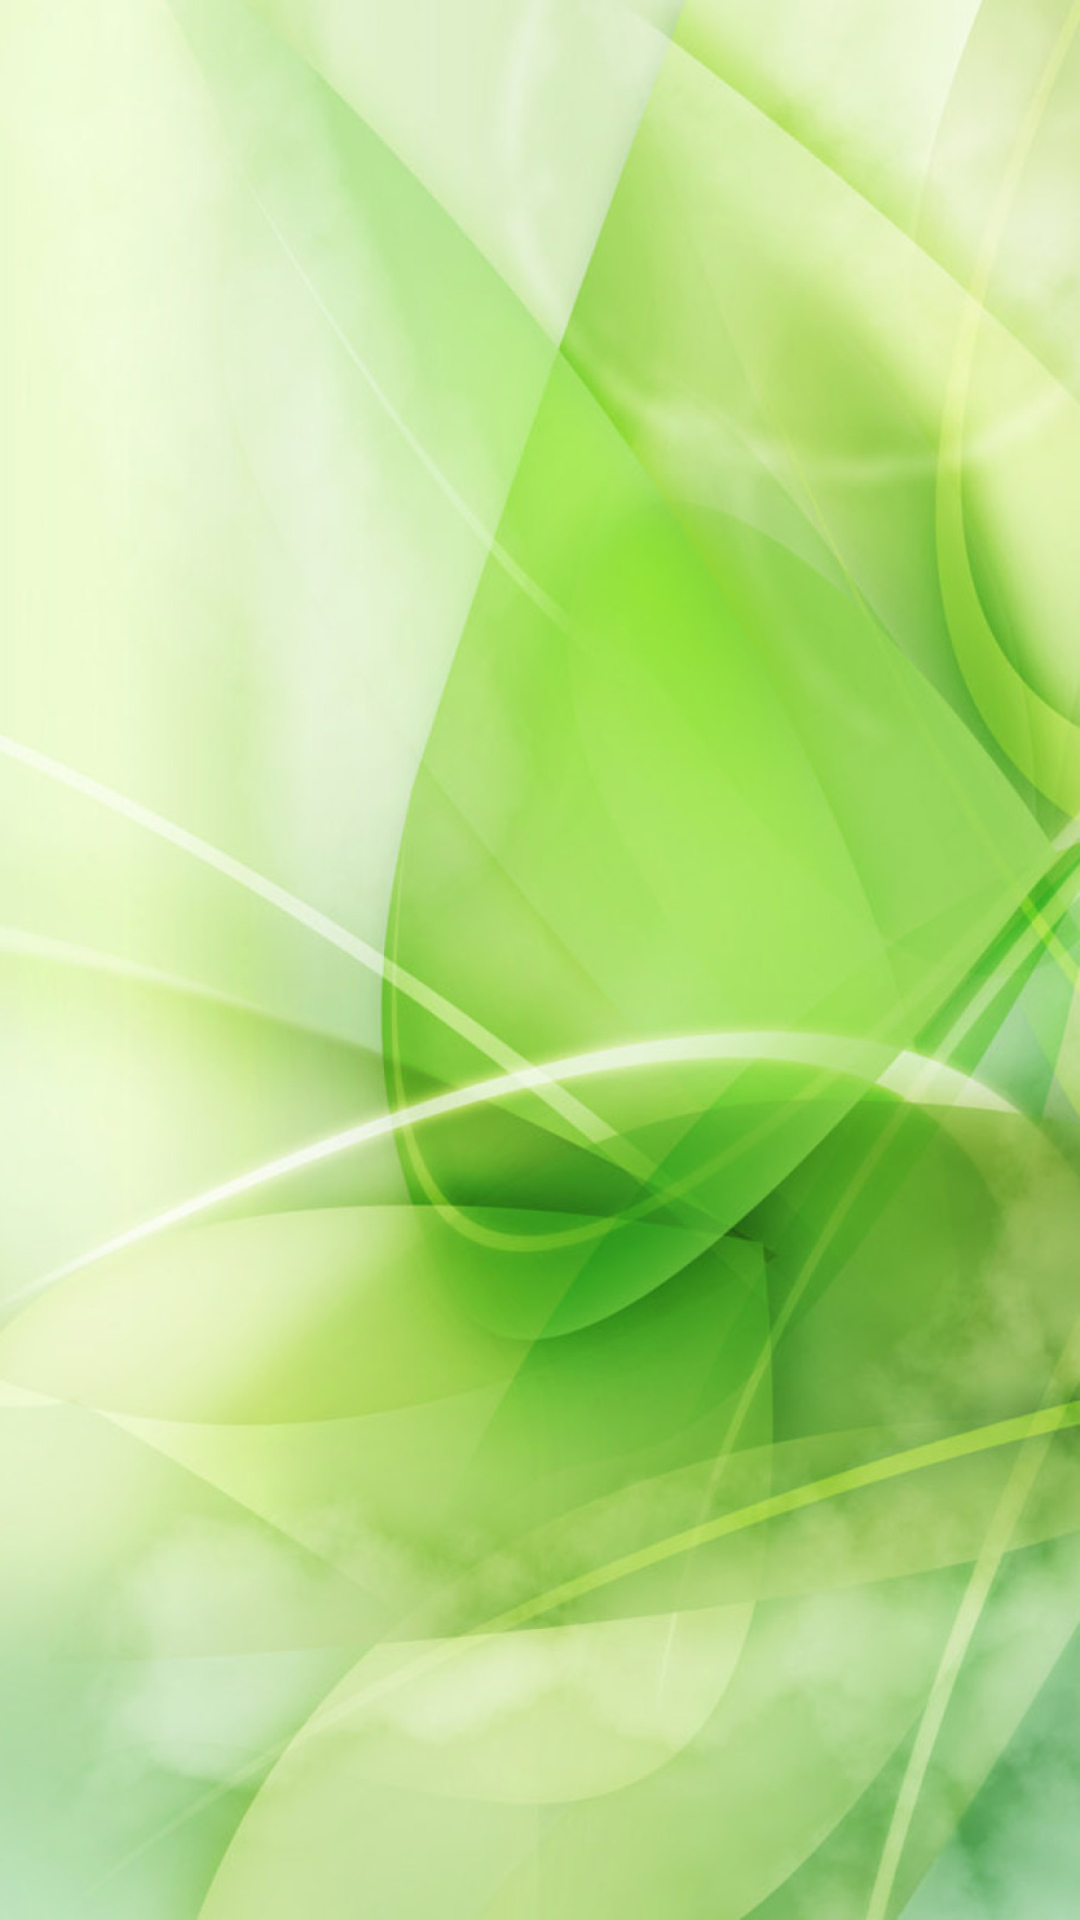 Green Leaf Abstract wallpaper 1080x1920